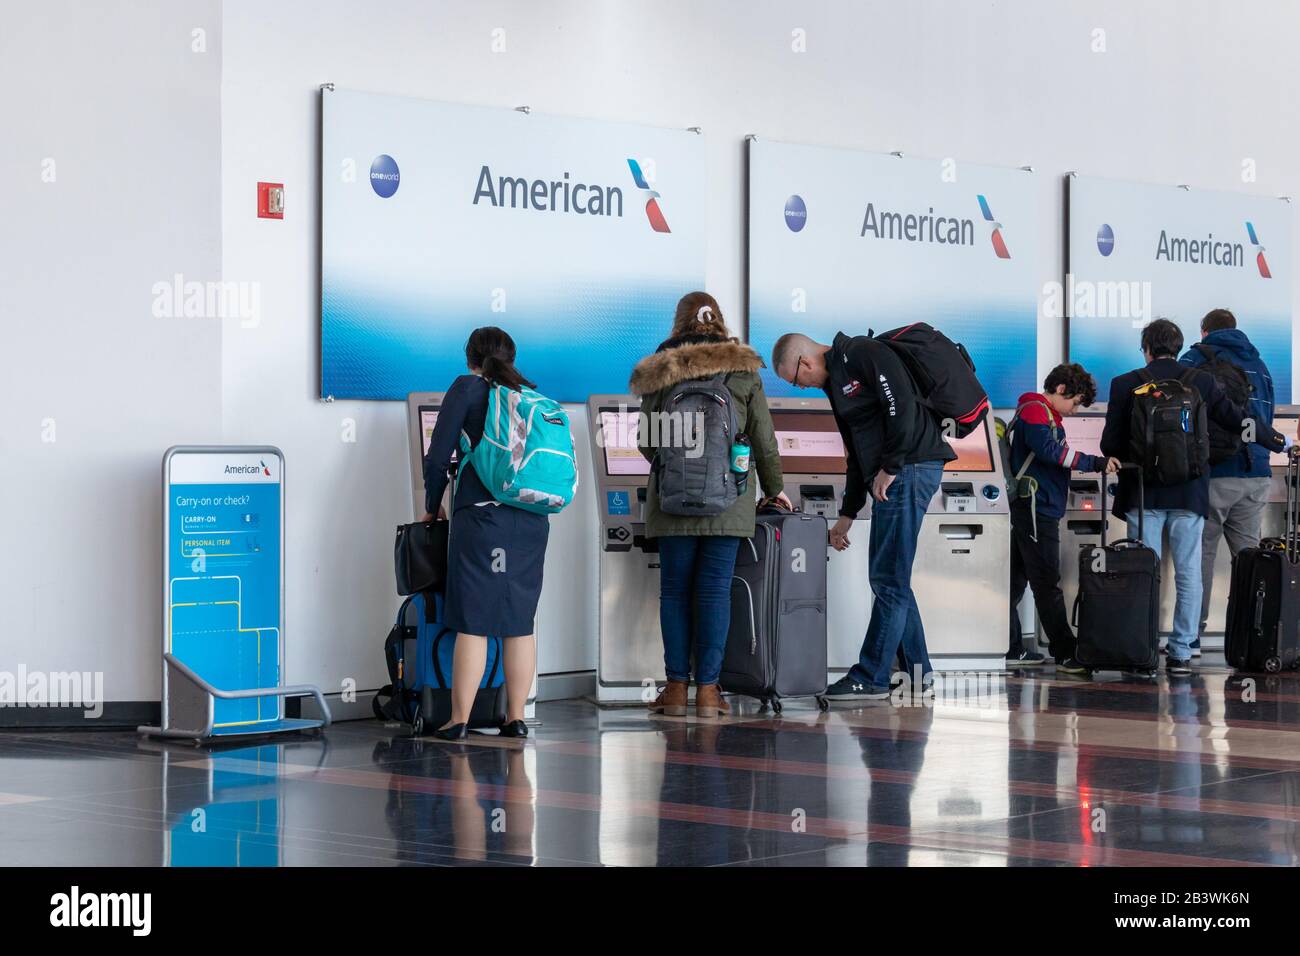 People seen using self-serve check-in kiosks for American Airlines inside Ronald Reagan Washington National Airport. Stock Photo